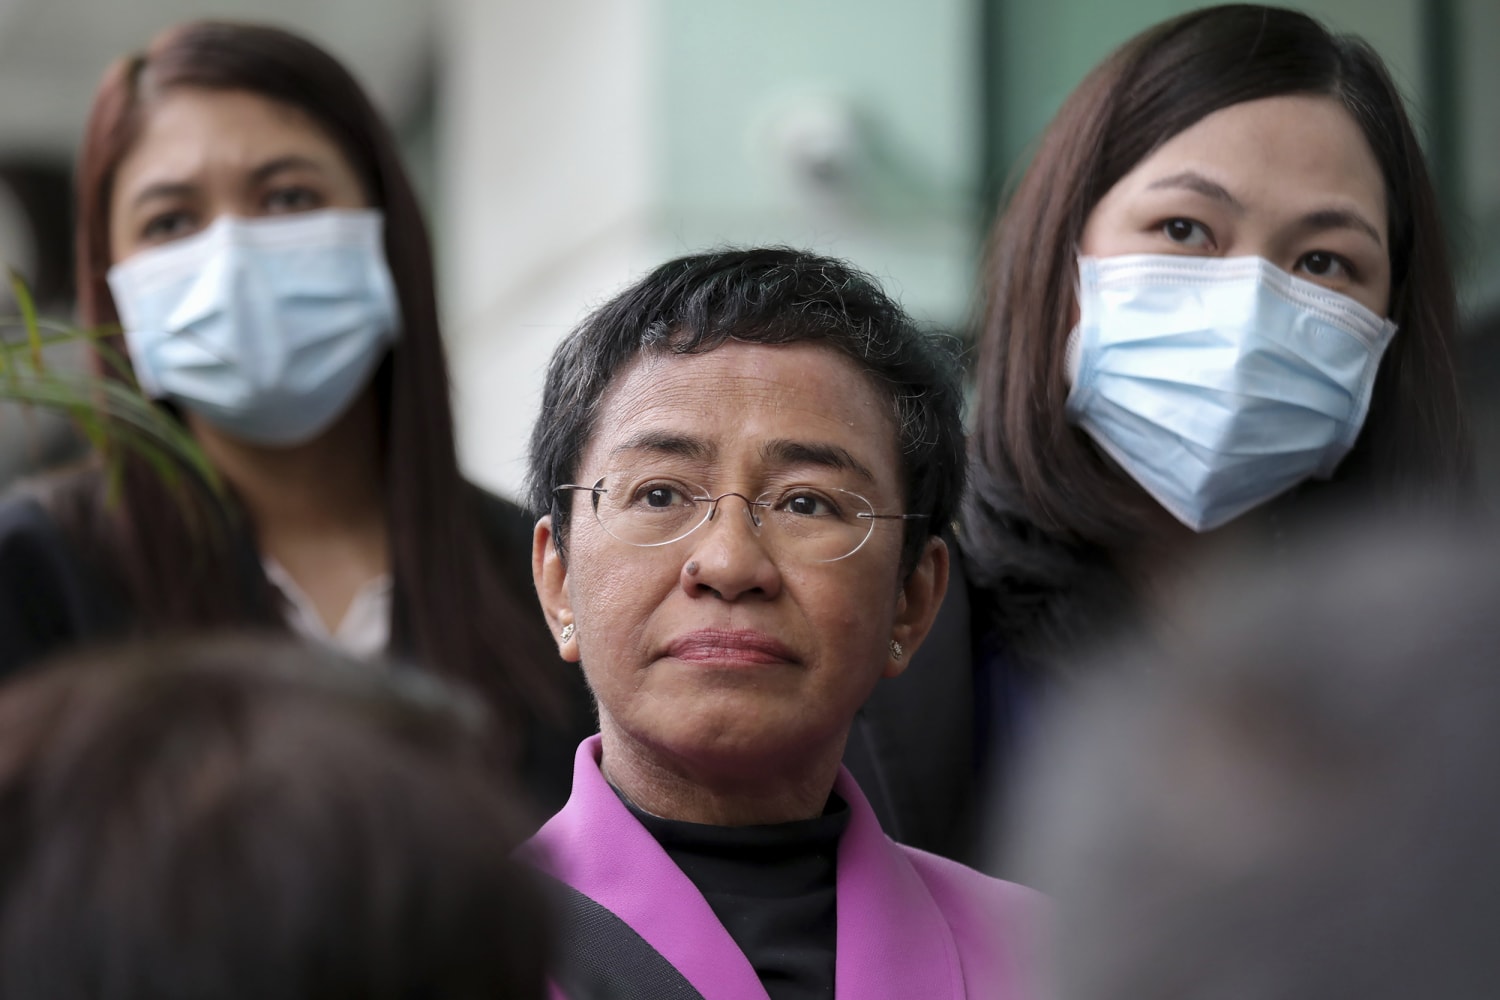 Journalist Maria Ressa cleared of tax evasion by Philippine court, calling it a win for justice